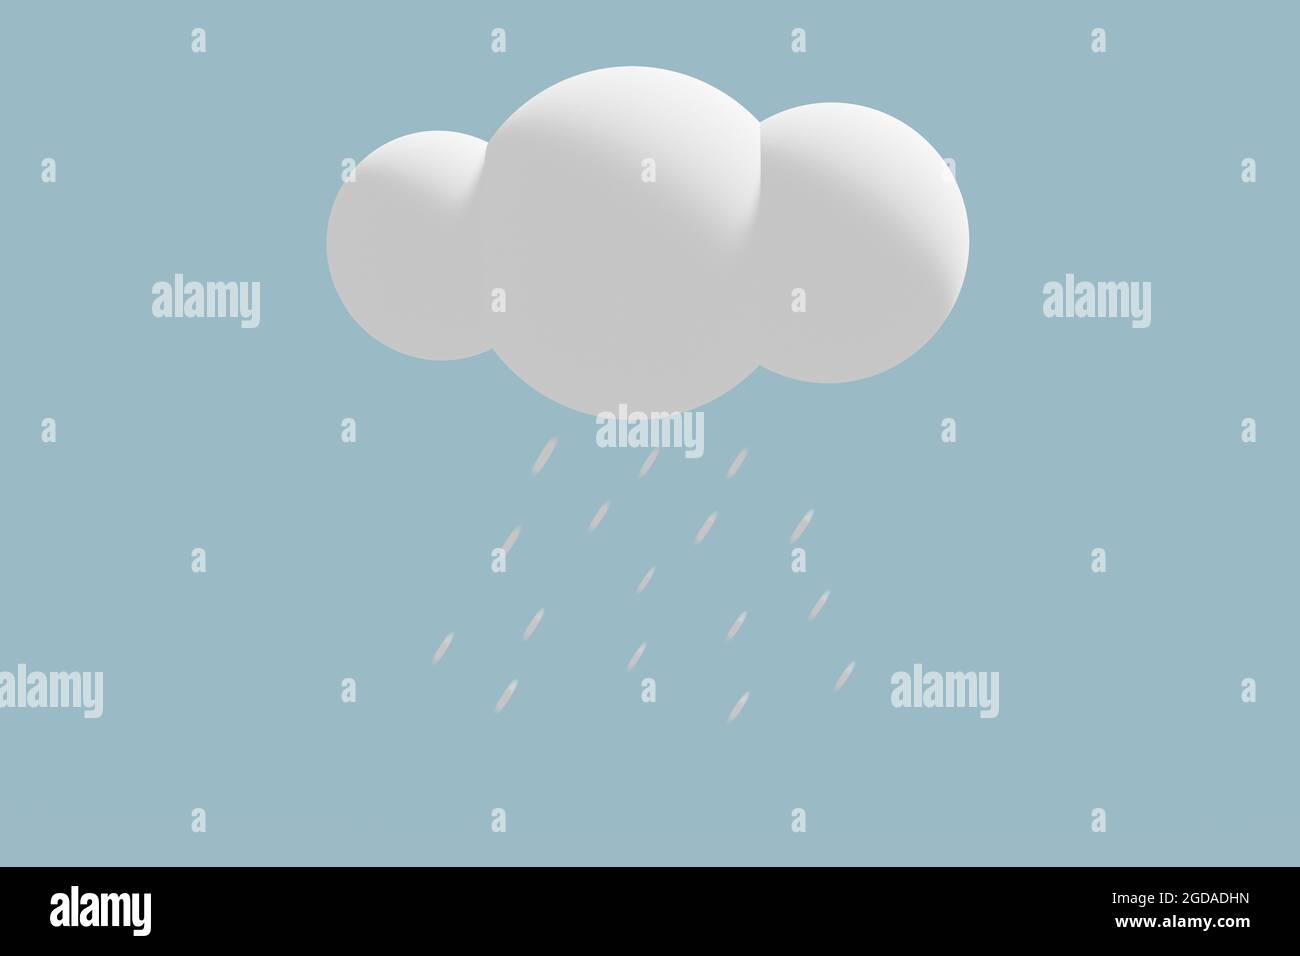 Raining clouds drawing isolated on blue background. 3D illustration. High quality 3d illustration Stock Photo